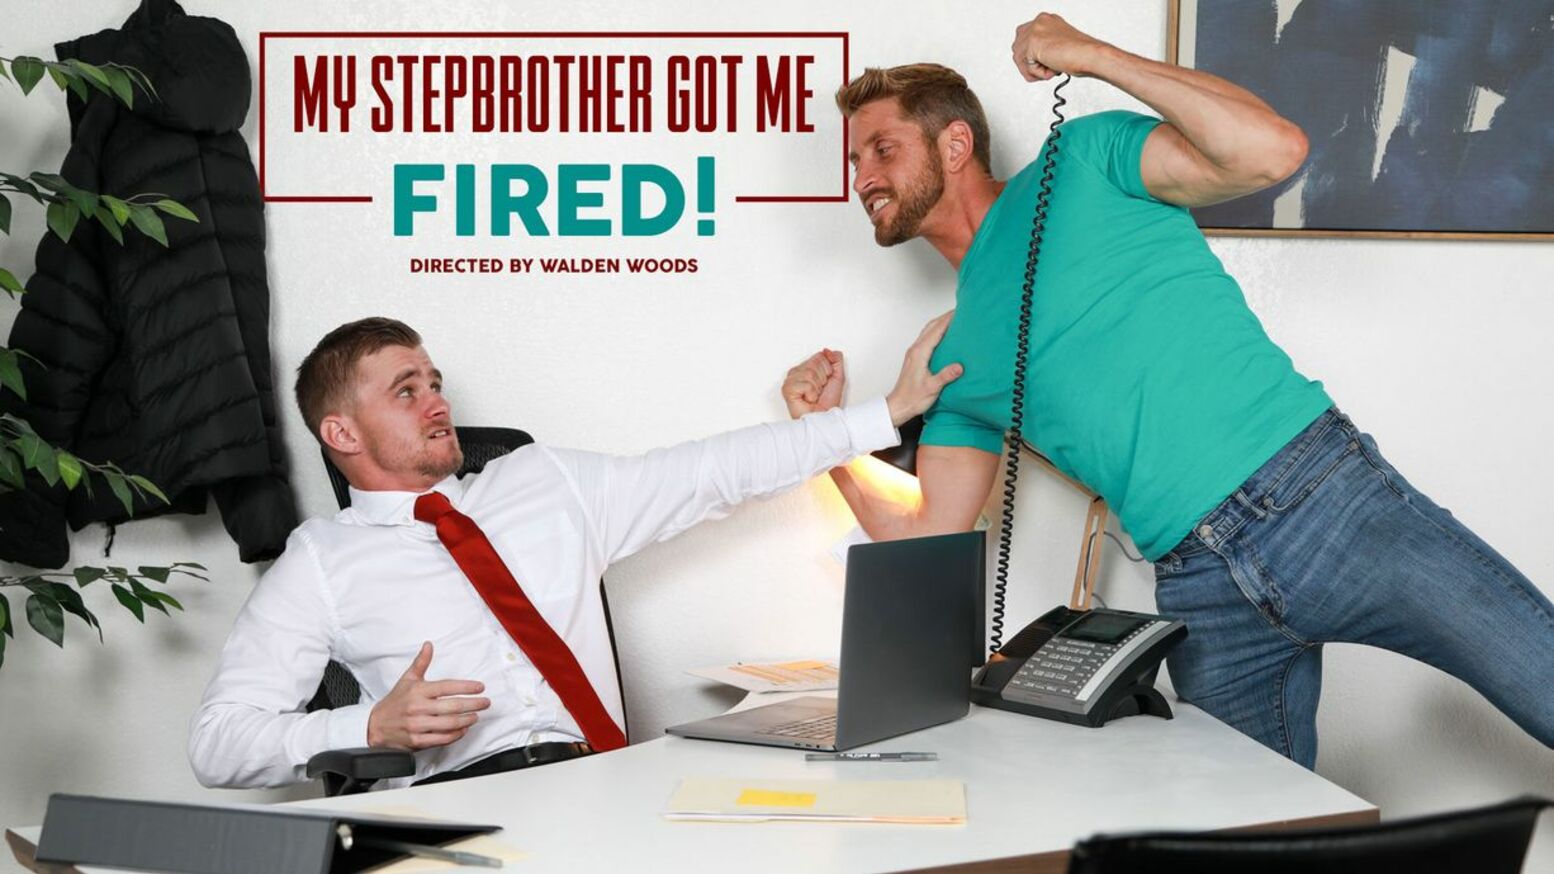 My Stepbrother Got Me Fired!